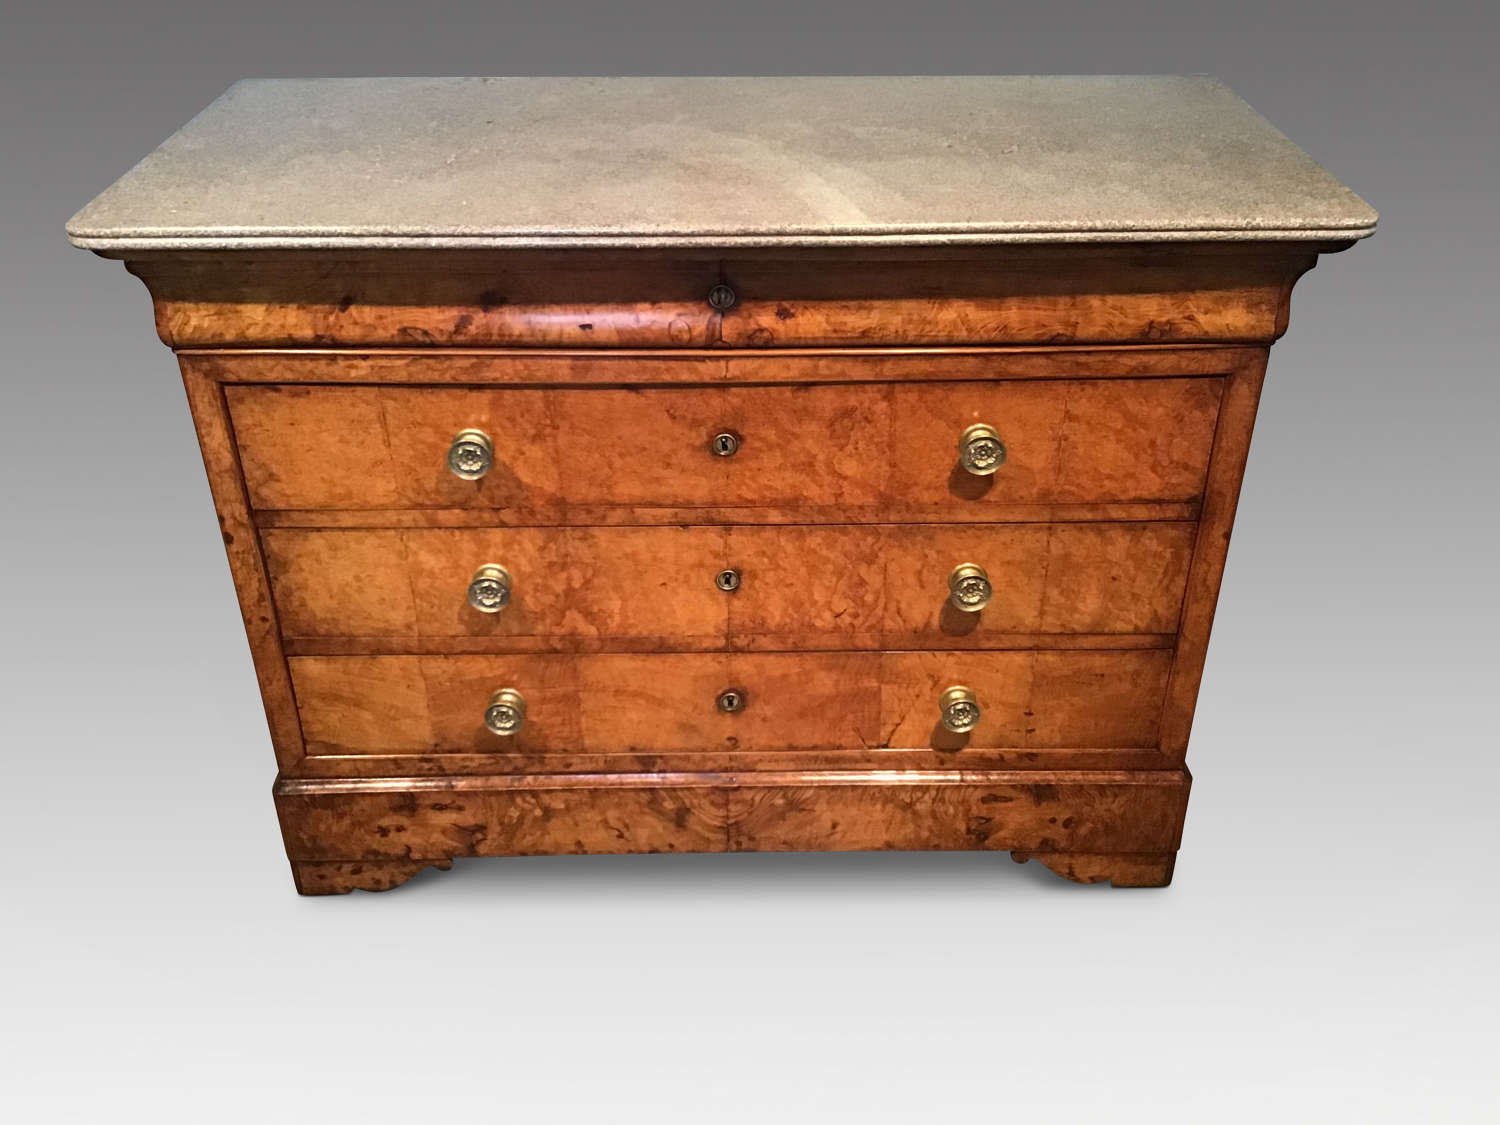 Antique French burr ash commode.